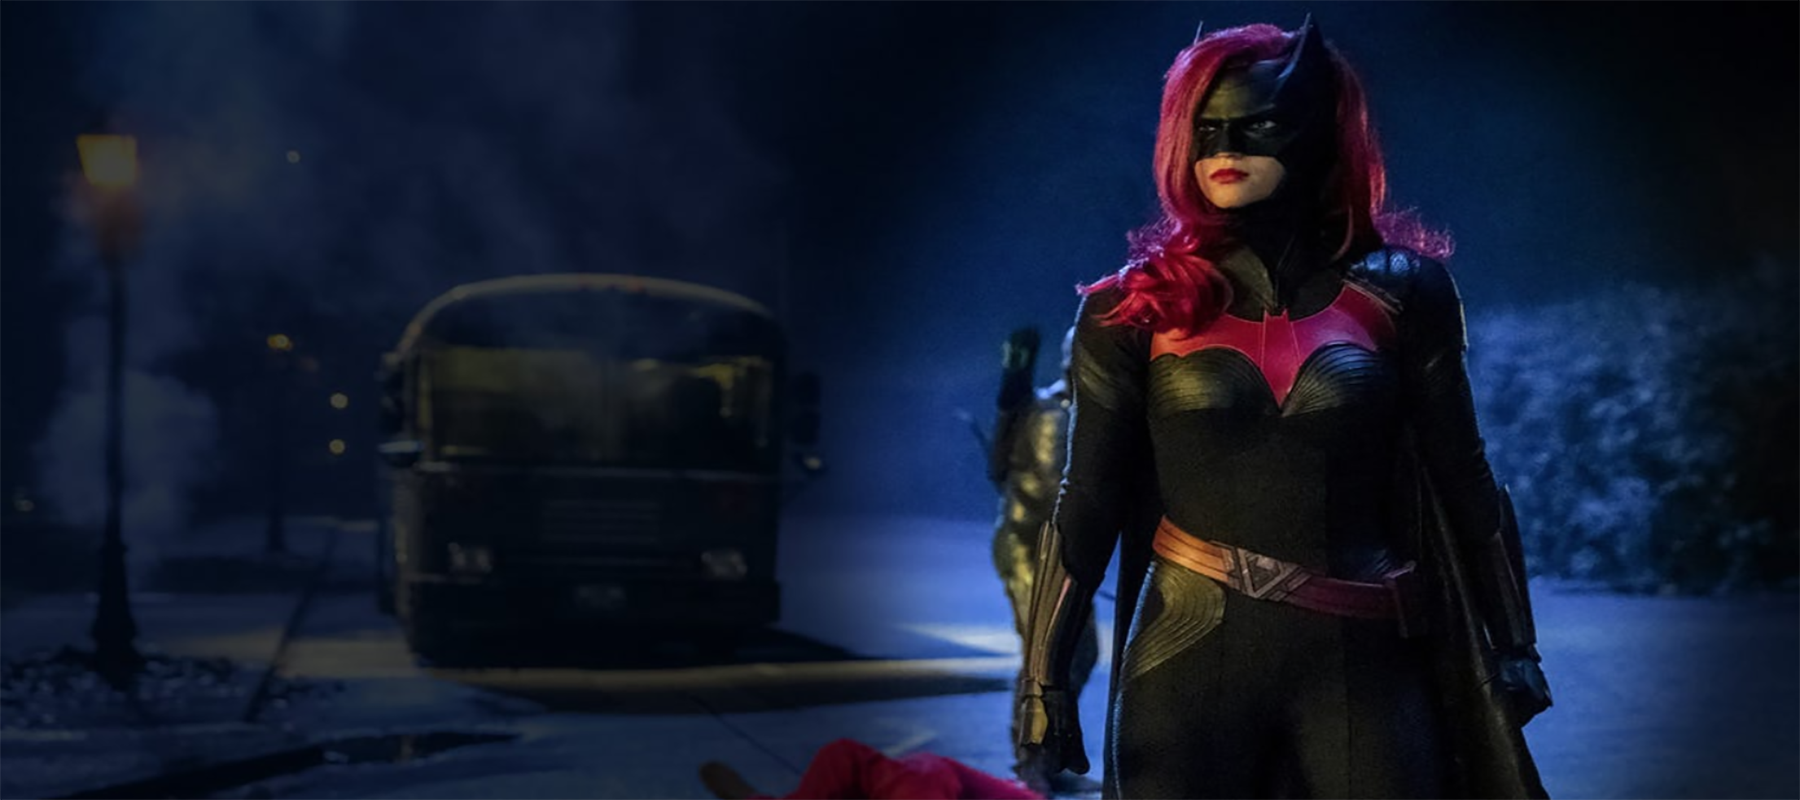 Cw S Batwoman First Look Trailer Llero